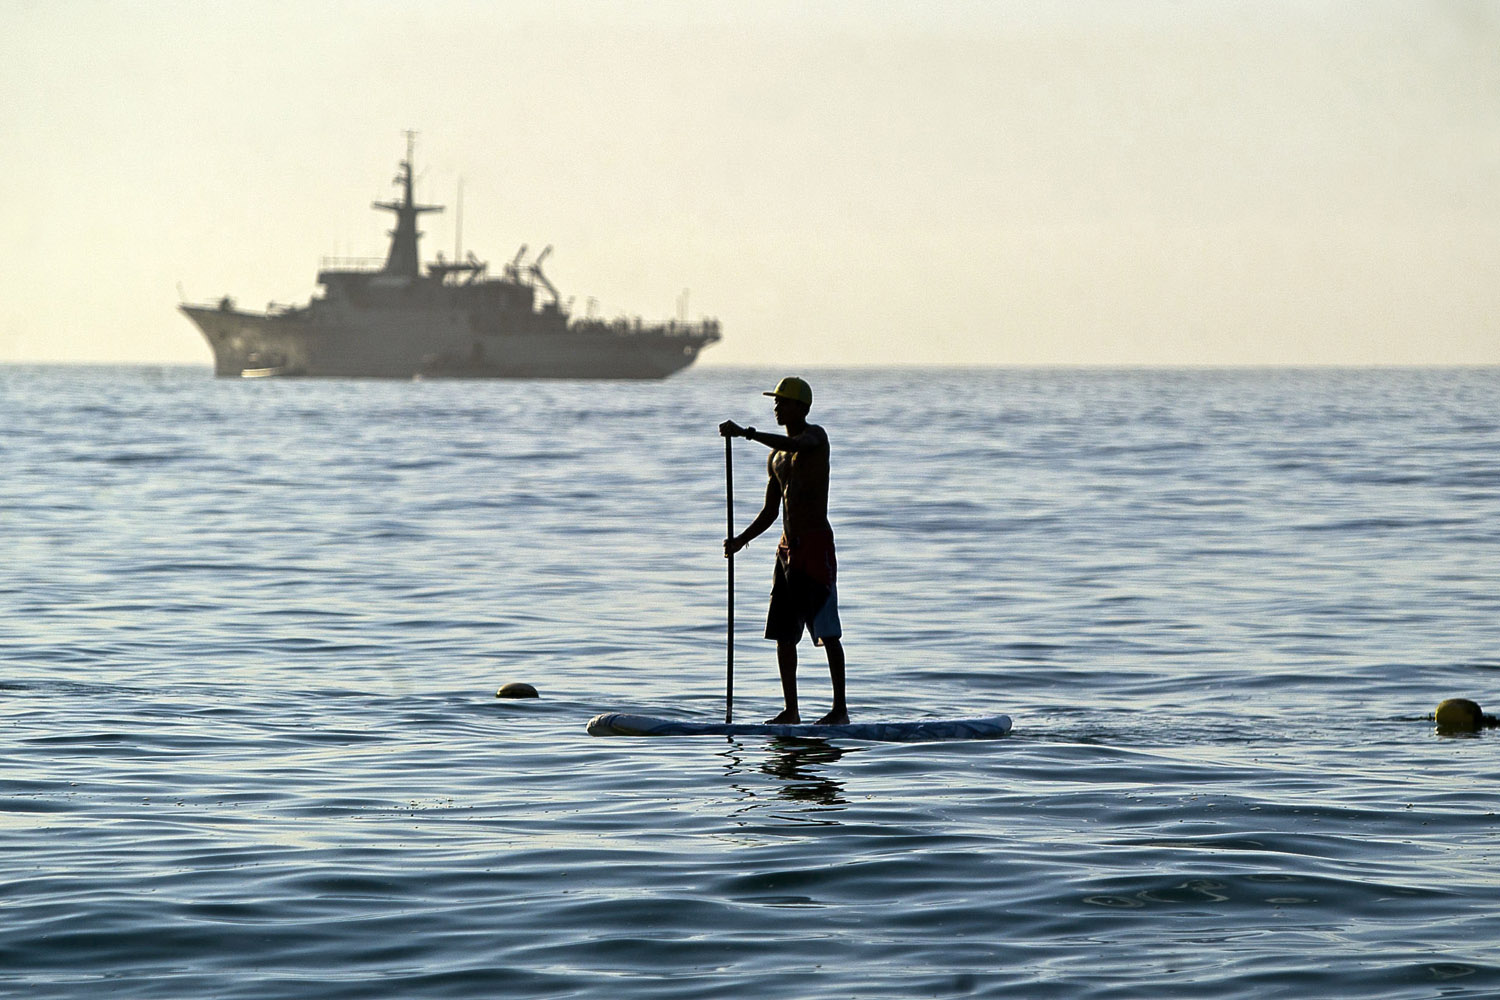 June 8, 2012. A man stand-up paddle surfs as a Mexican navy ship patrols the bay waters in San Jose del Cabo in Mexico's Baja Peninsula. Security has been beefed up in preparation for the upcoming G-20 that will be held in Los Cabos June 18-19.